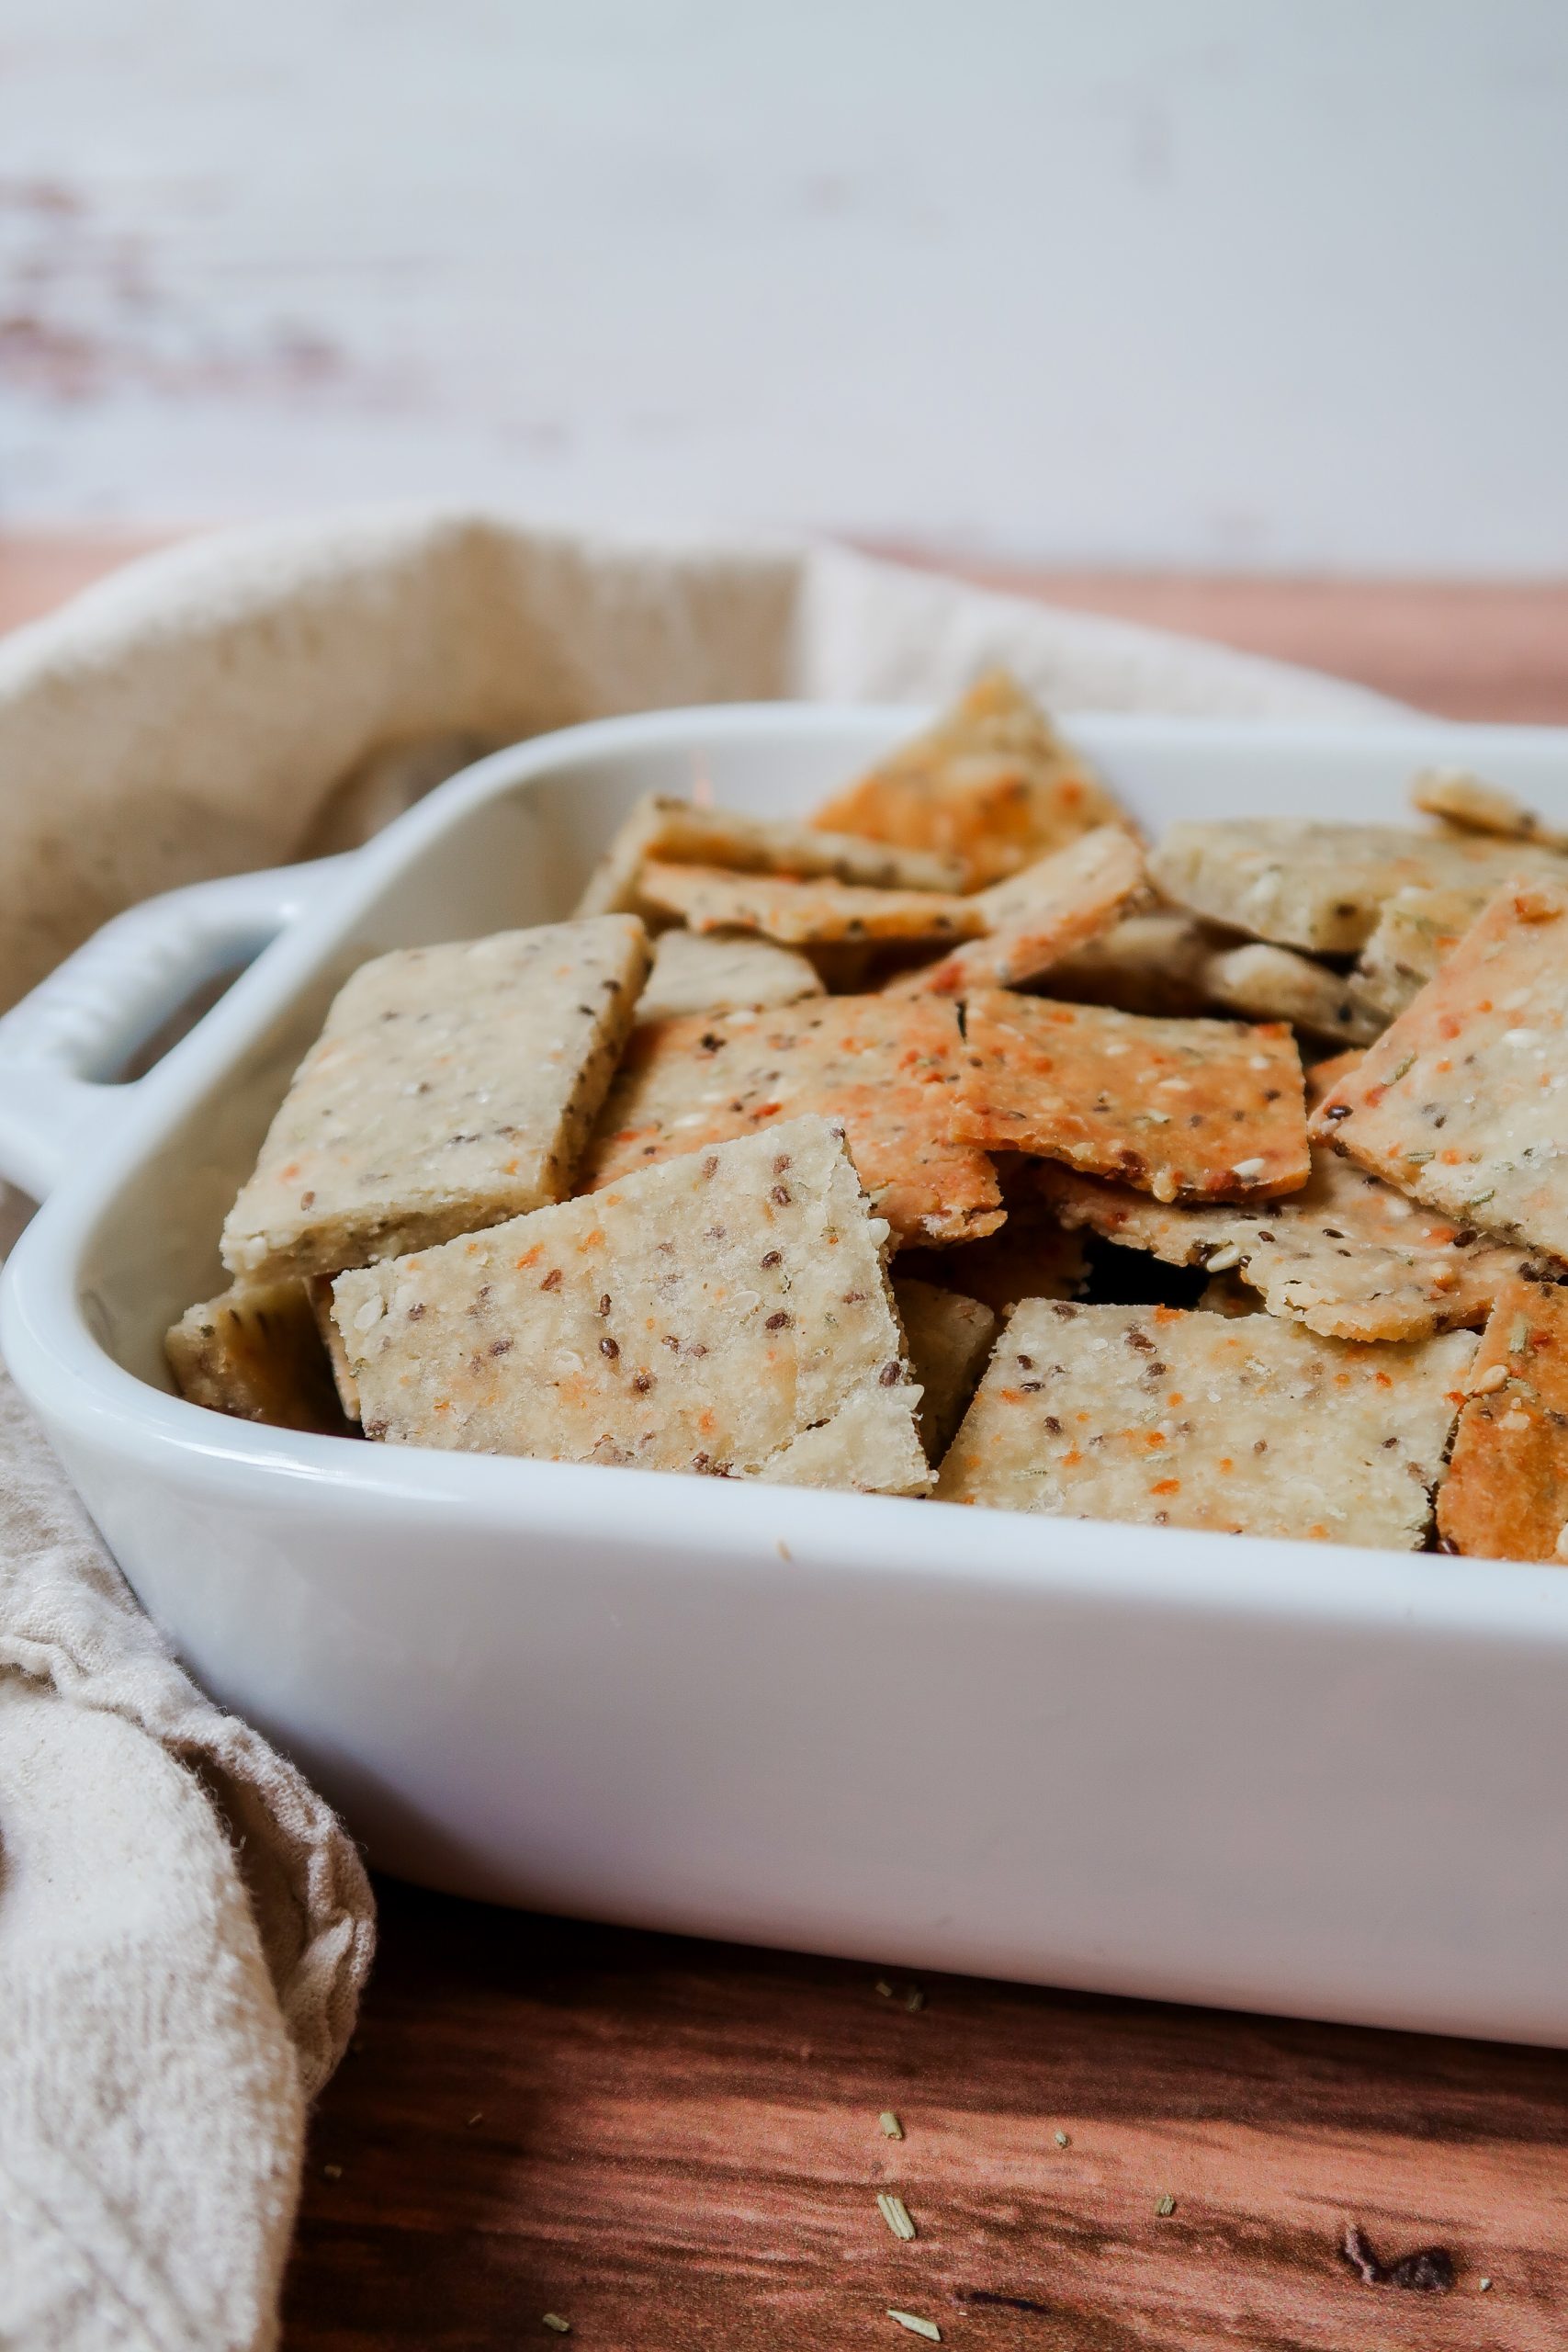 Gluten Free Sourdough Discard Crackers from Wonders of Cooking